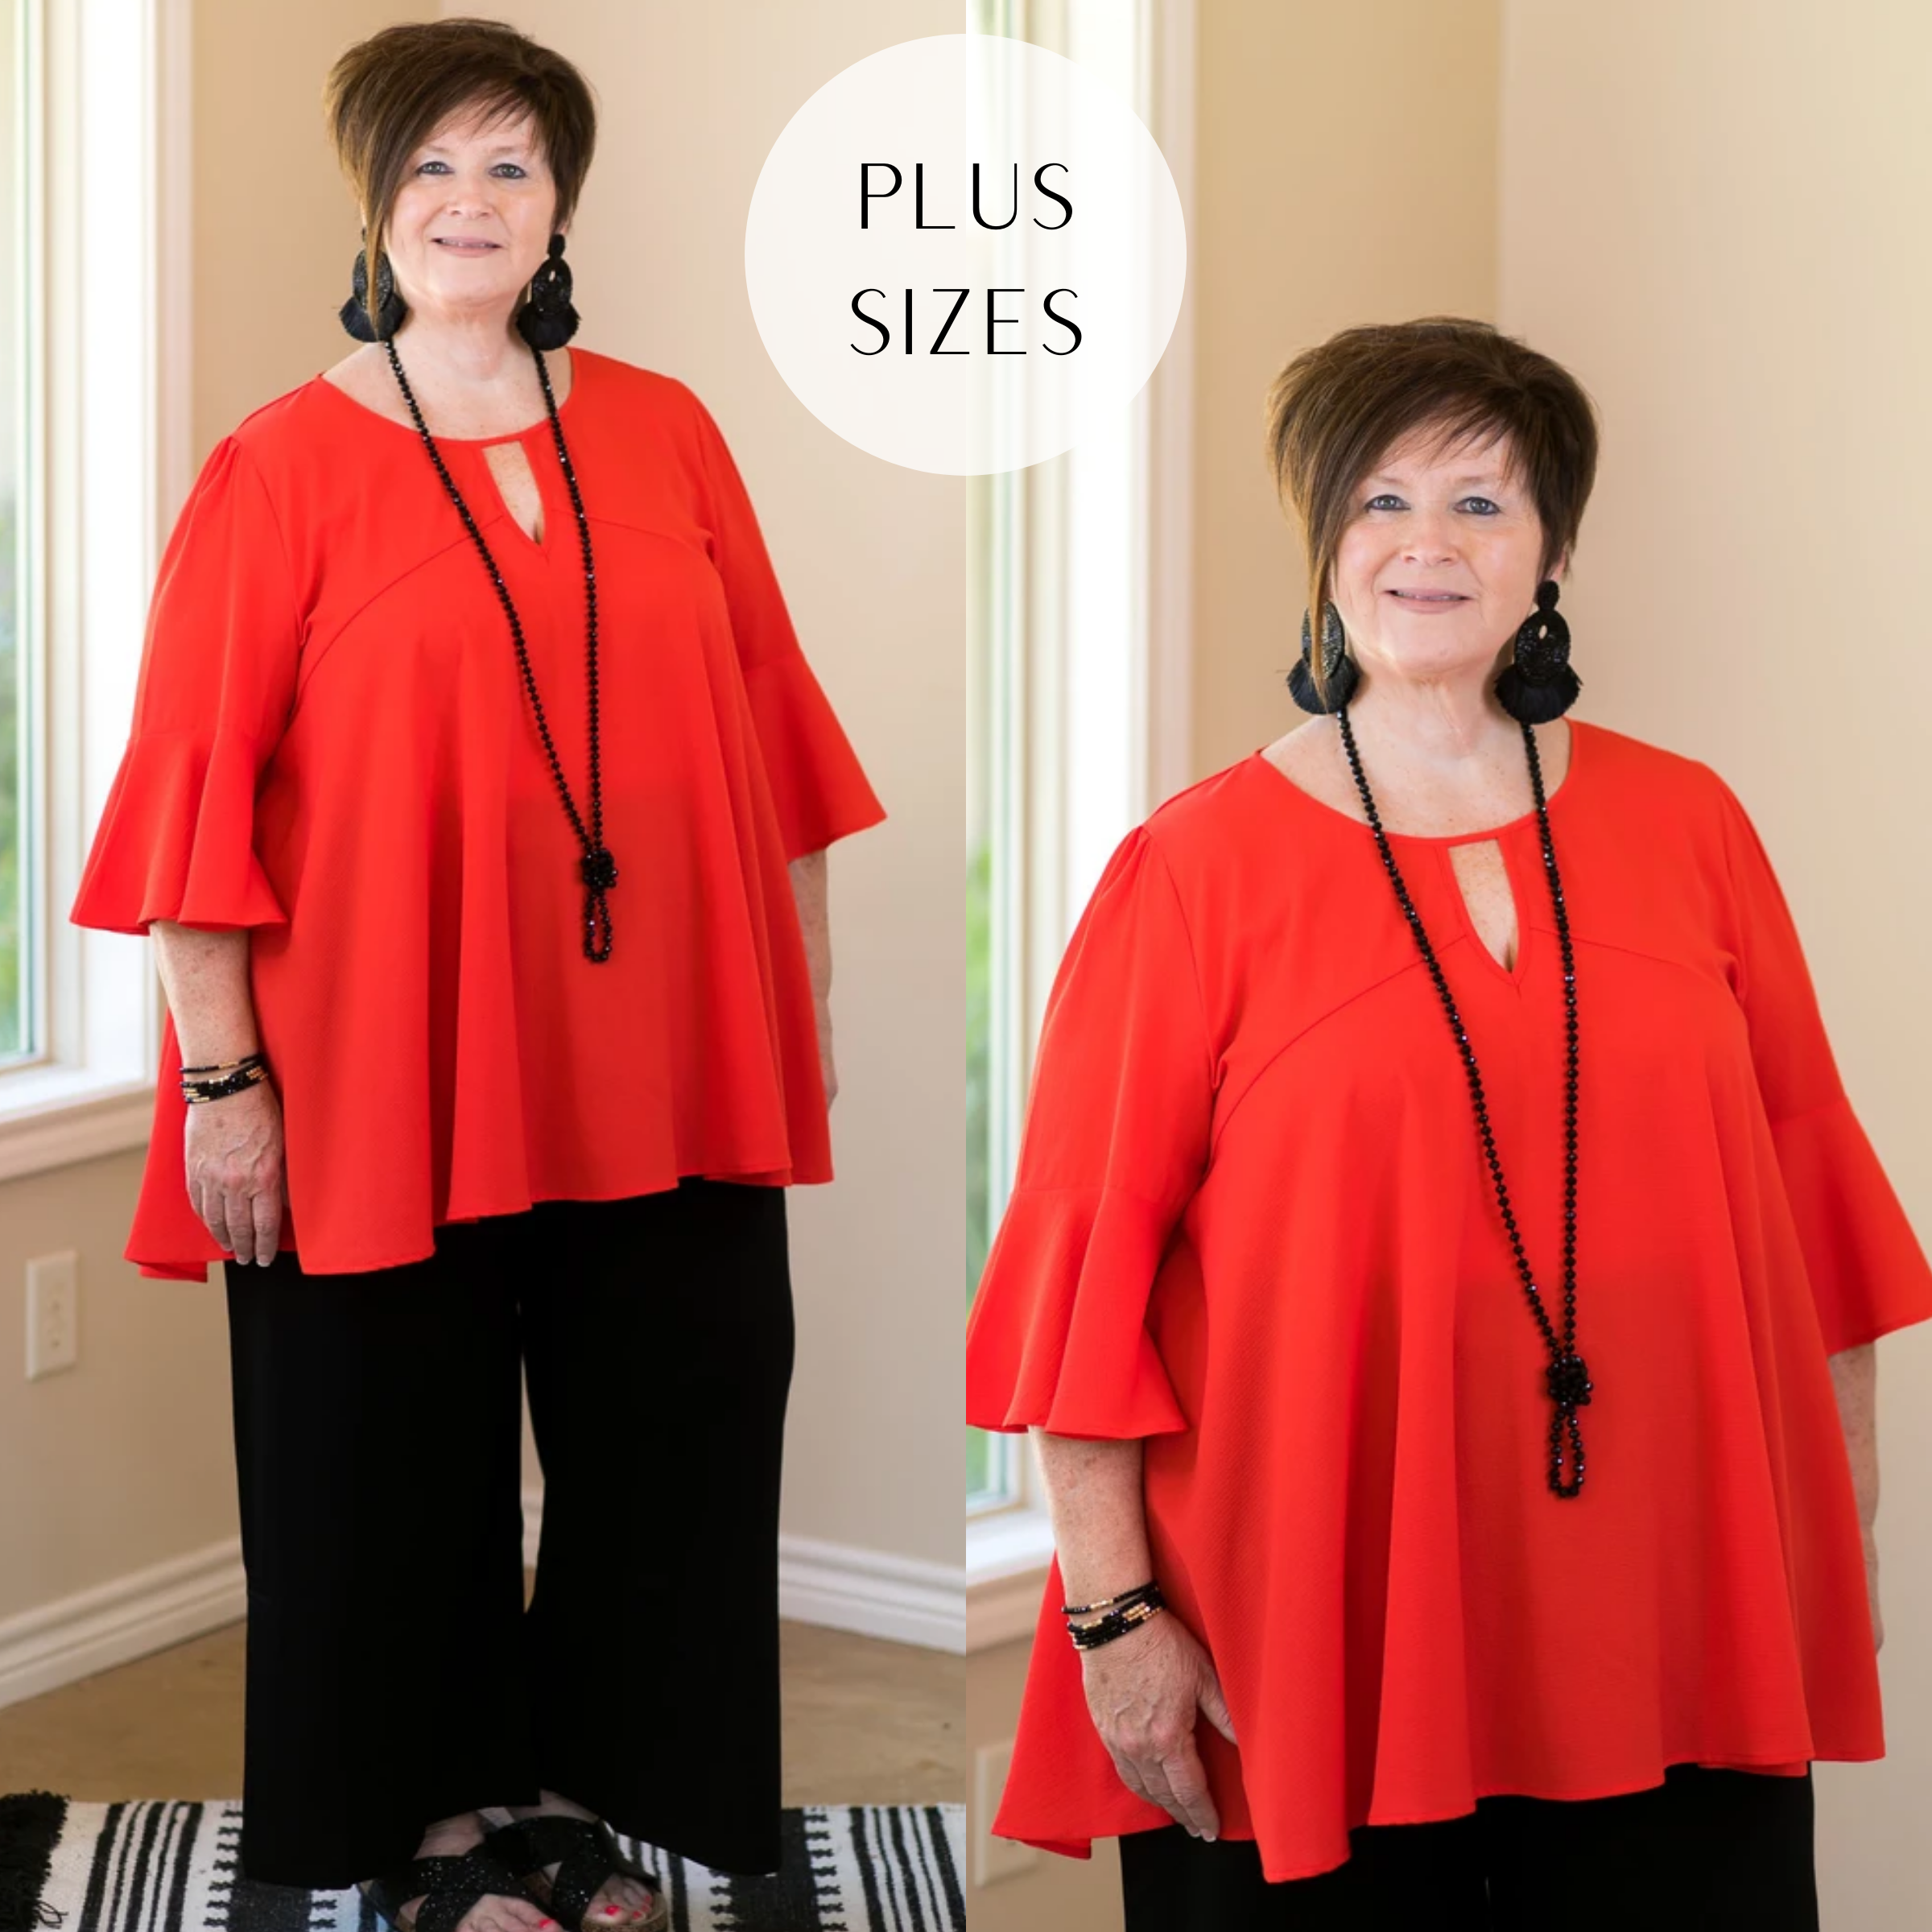 Last Chance Size XL & 1XL | Plus Size | Meet Me In The Middle Flare Sleeve Top with Keyhole in Tomato Red - Giddy Up Glamour Boutique